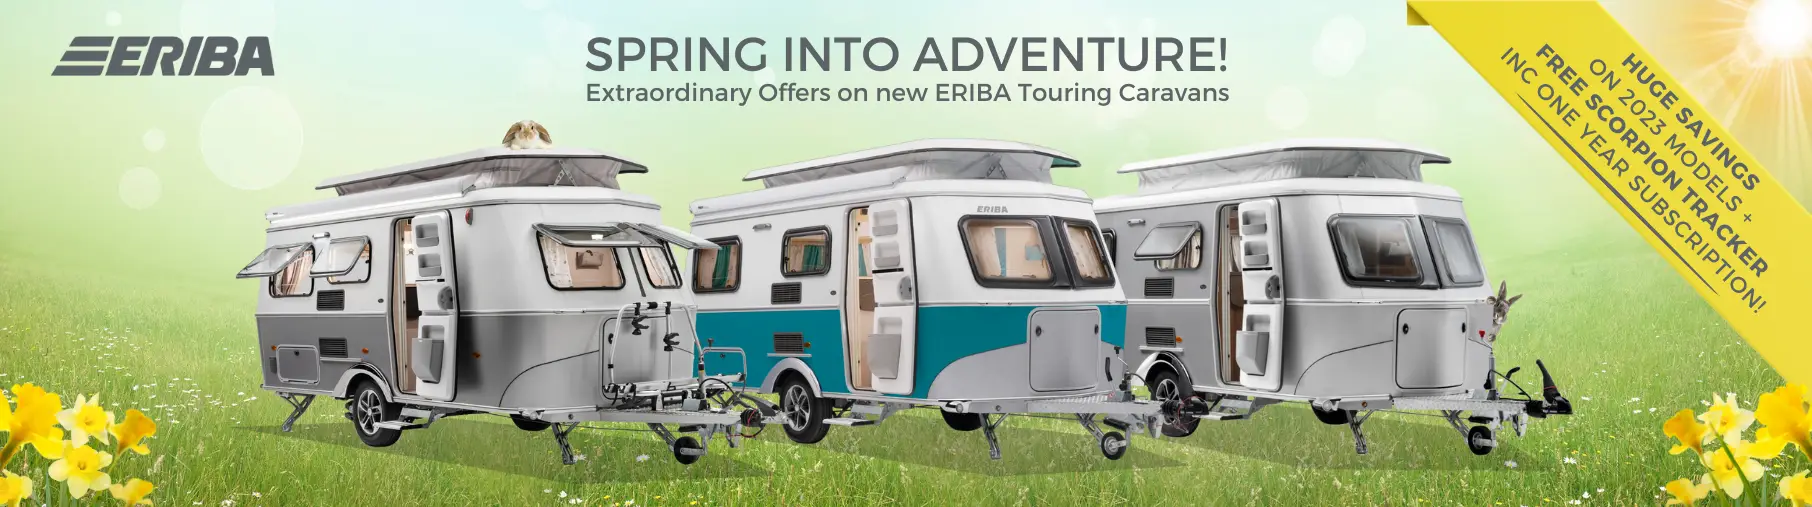 Eriba Touring Spring Into Adventure Offer Header showing three ERIBA Touring Caravans with a Spring background.